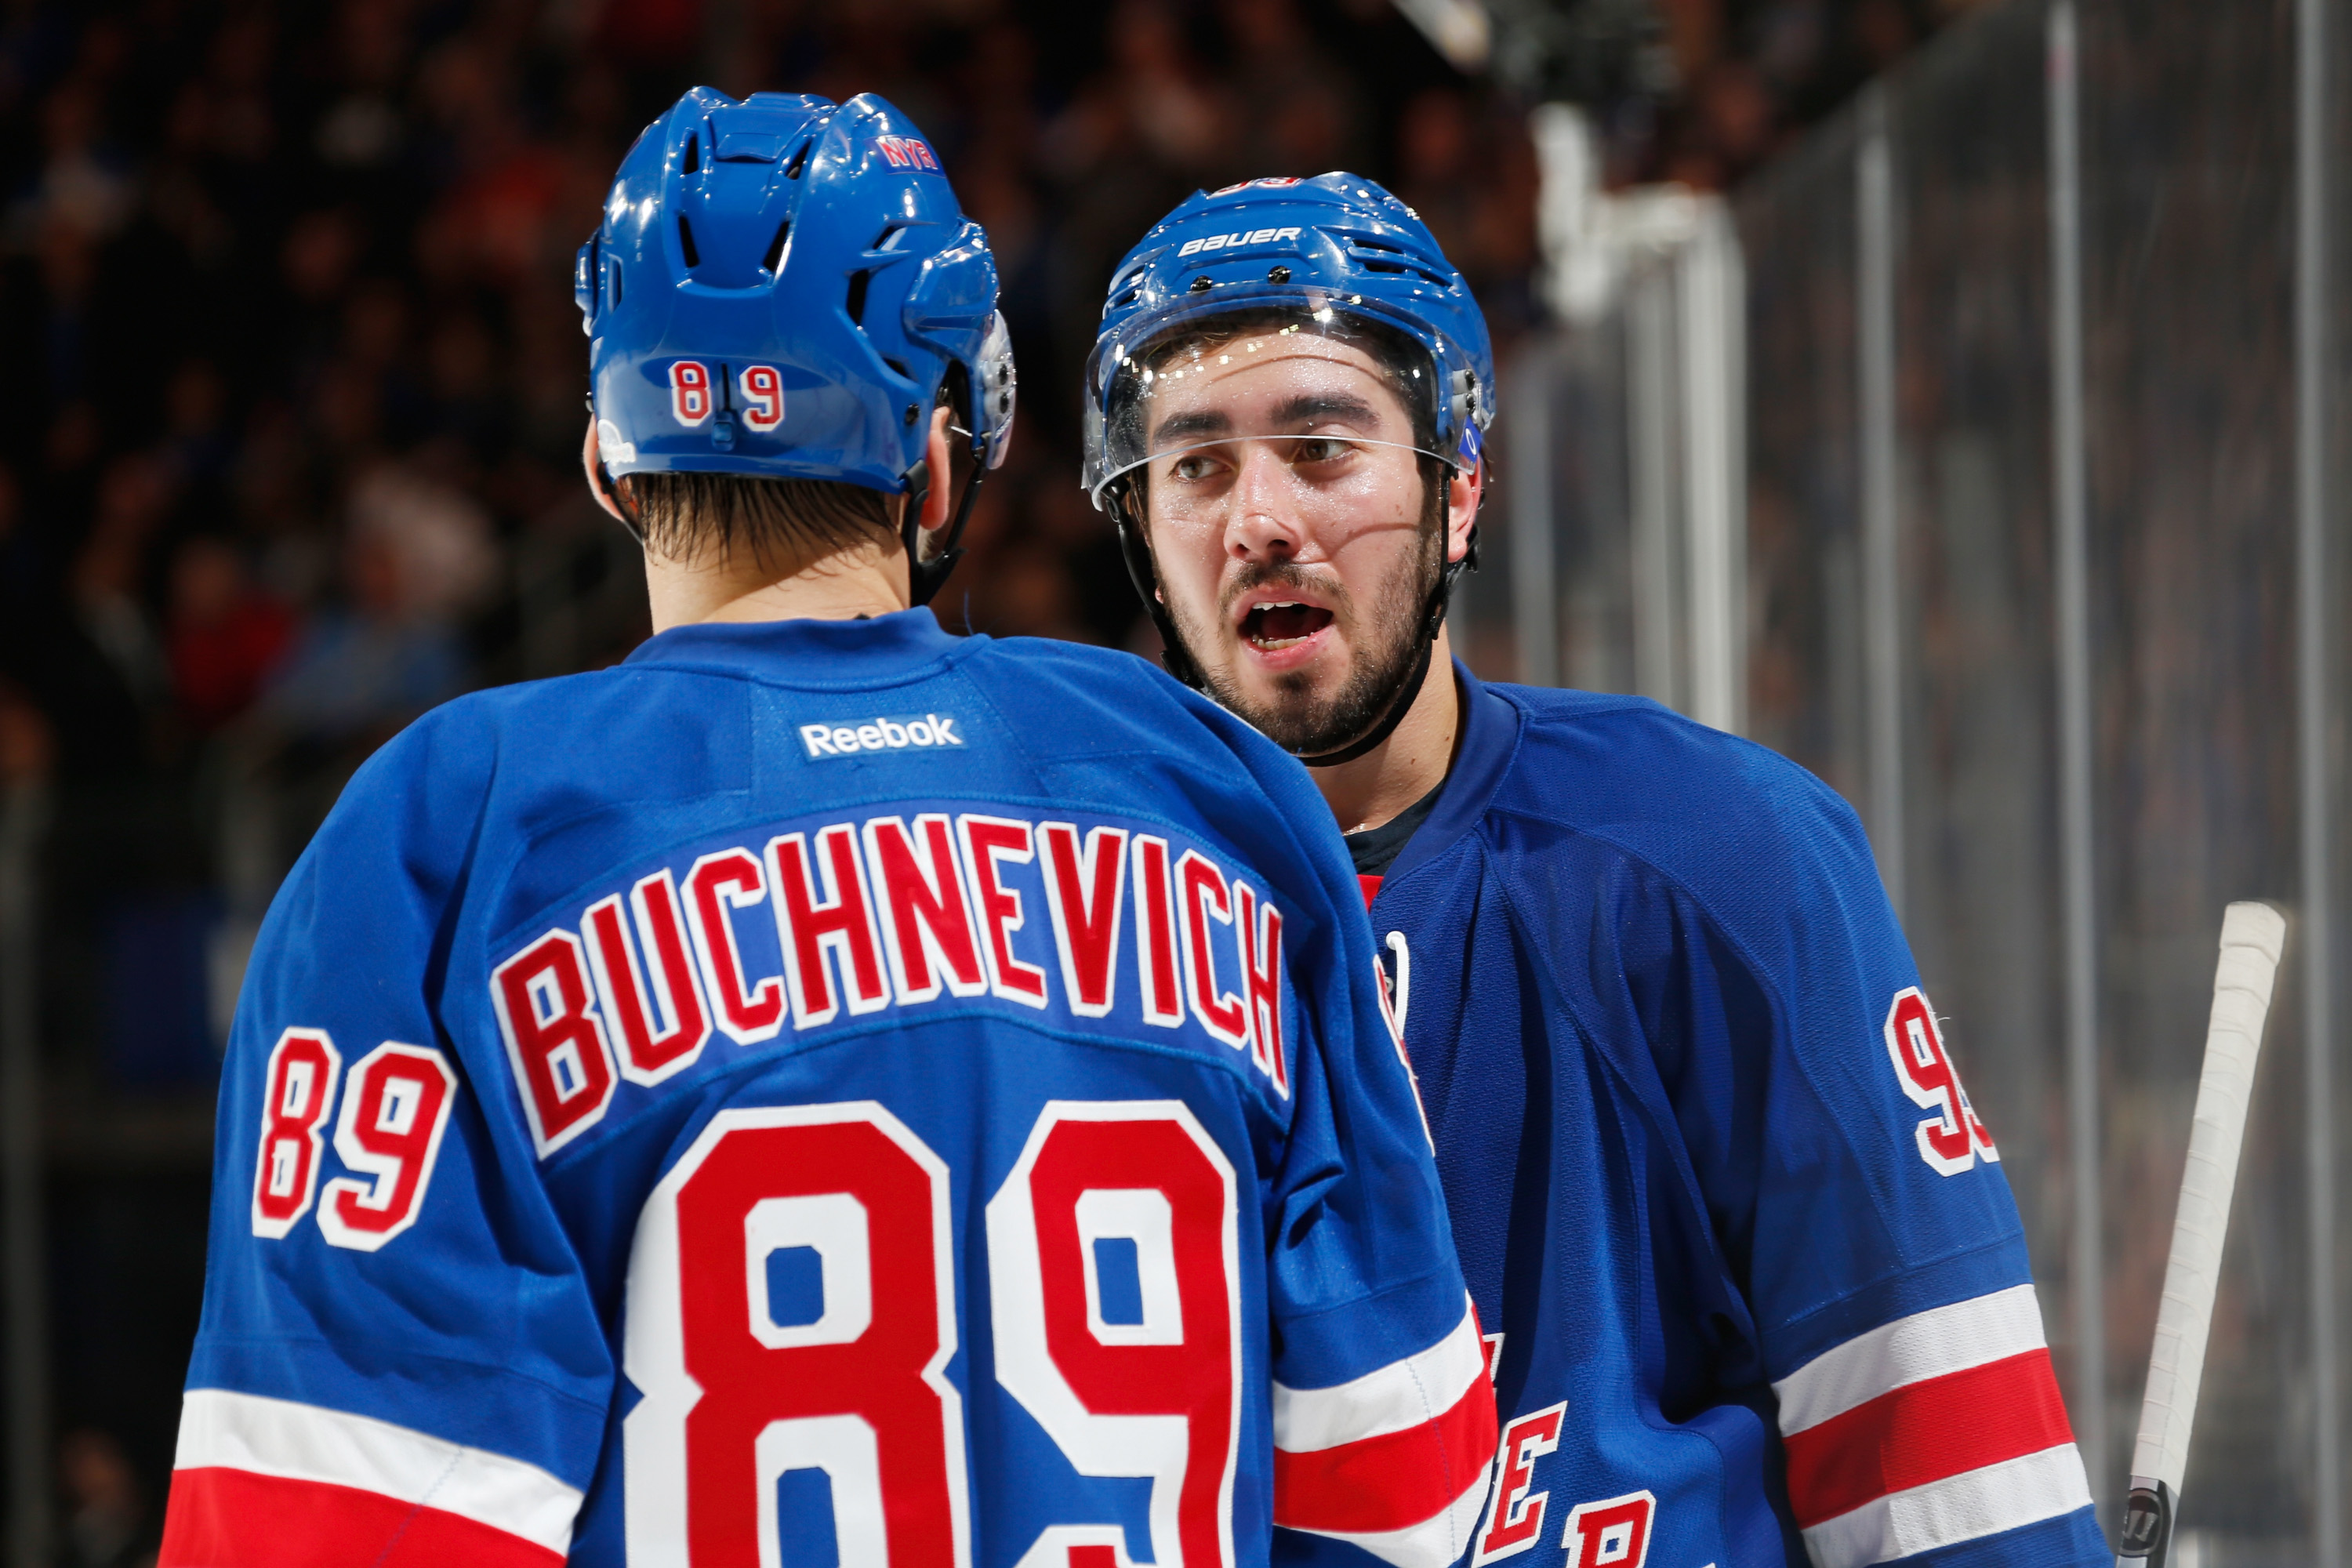 NEW YORK, NY - OCTOBER 13: Mika Zibanejad #93 and Pavel Buchnevich #89 of the New York Rangers talk during a break in the action against the New York Islanders at Madison Square Garden on October 13, 2016 in New York City. (Photo by Jared Silber/NHLI via Getty Images)